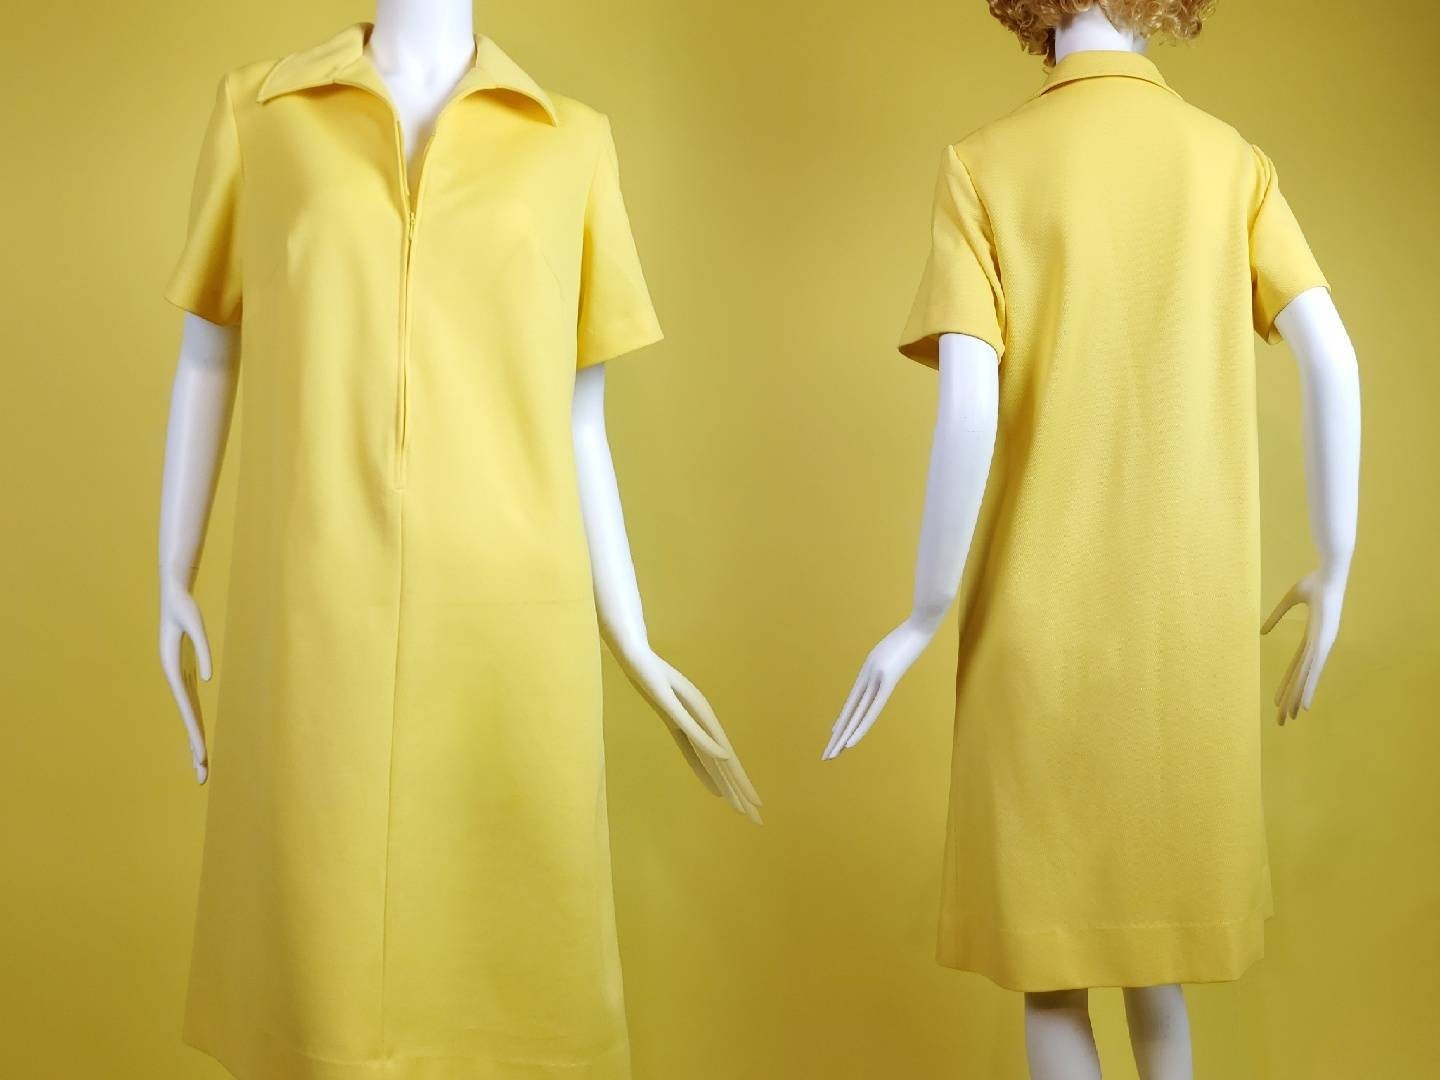 Plus Size Vintage 60s/70s Yellow Poly Mod Dress by Amy Adams. | Etsy